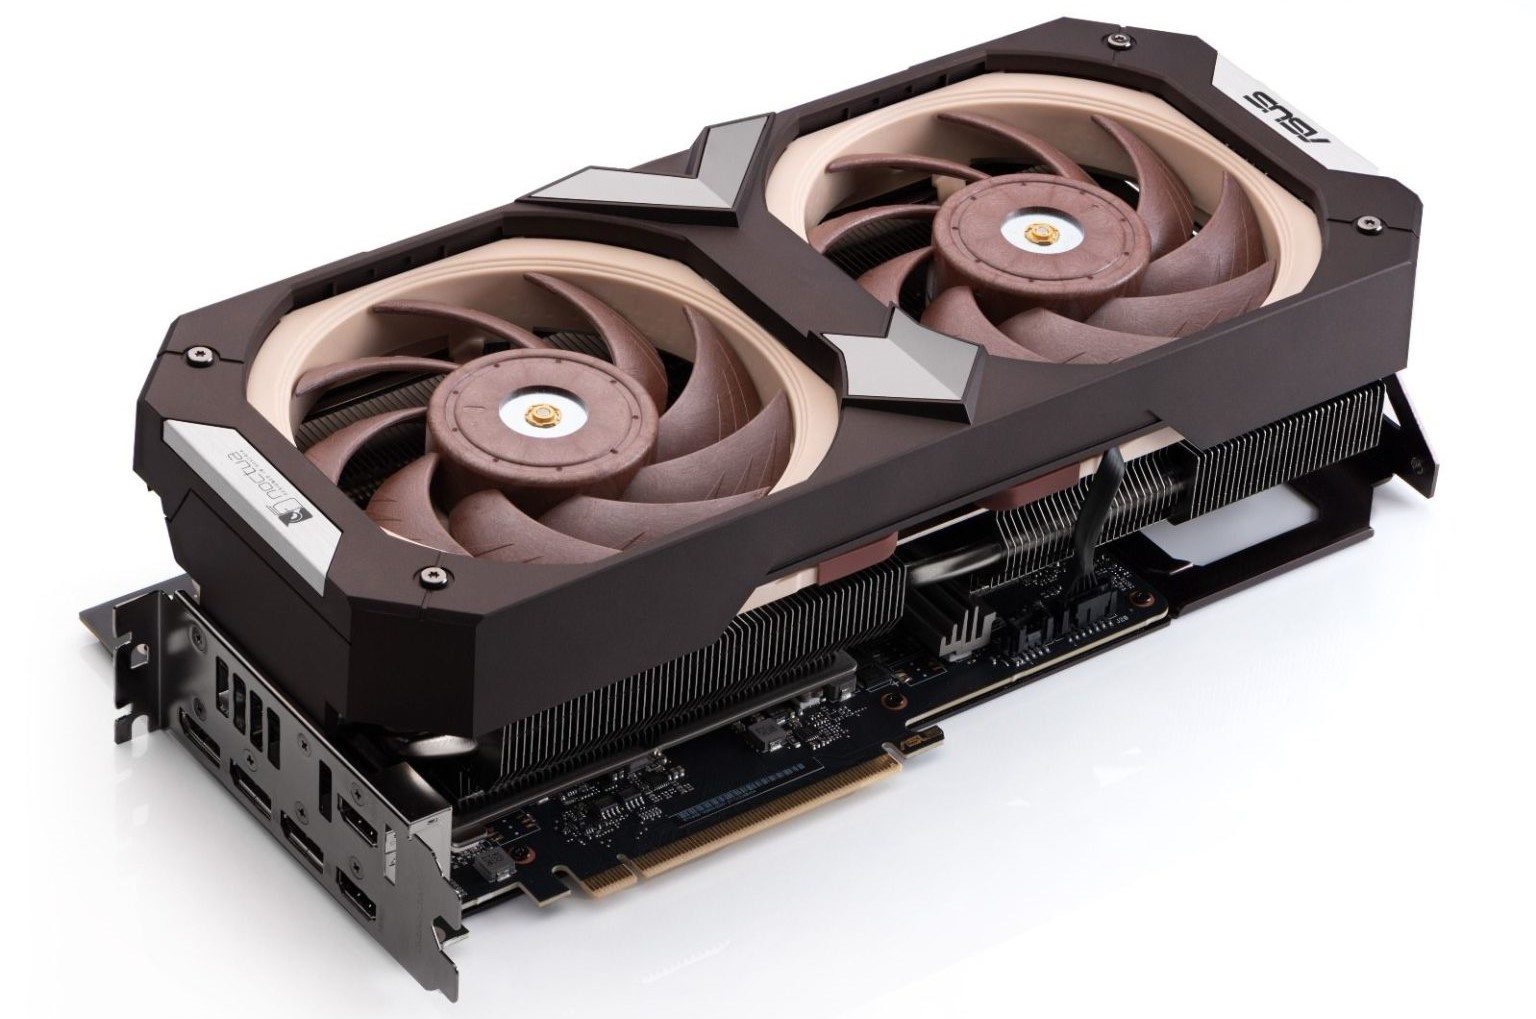 Asus GeForce RTX 4080 Noctua Edition launches with ridiculous price and  4.3-slot profile -  News